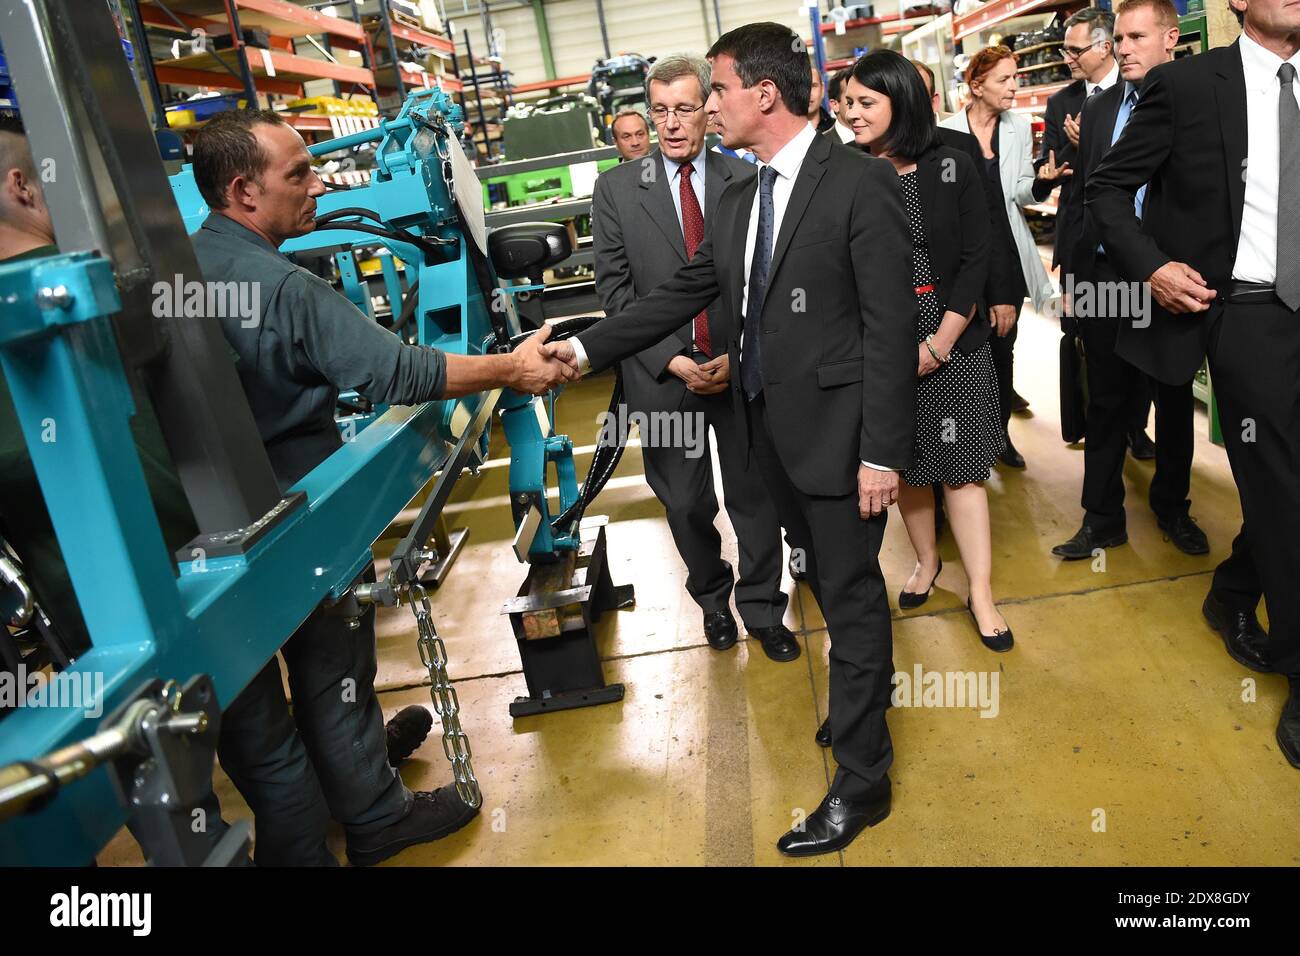 French Prime minister Manuel Valls and French Minister for Housing, Territorial Equality and Rurality Sylvia Pinel visit a 'preciculture' plant, which makes tractors, on September 12, 2014 in Fere Champenoise, France. Photo by Nicolas Gouhier/ABACAPRESS.COM Stock Photo